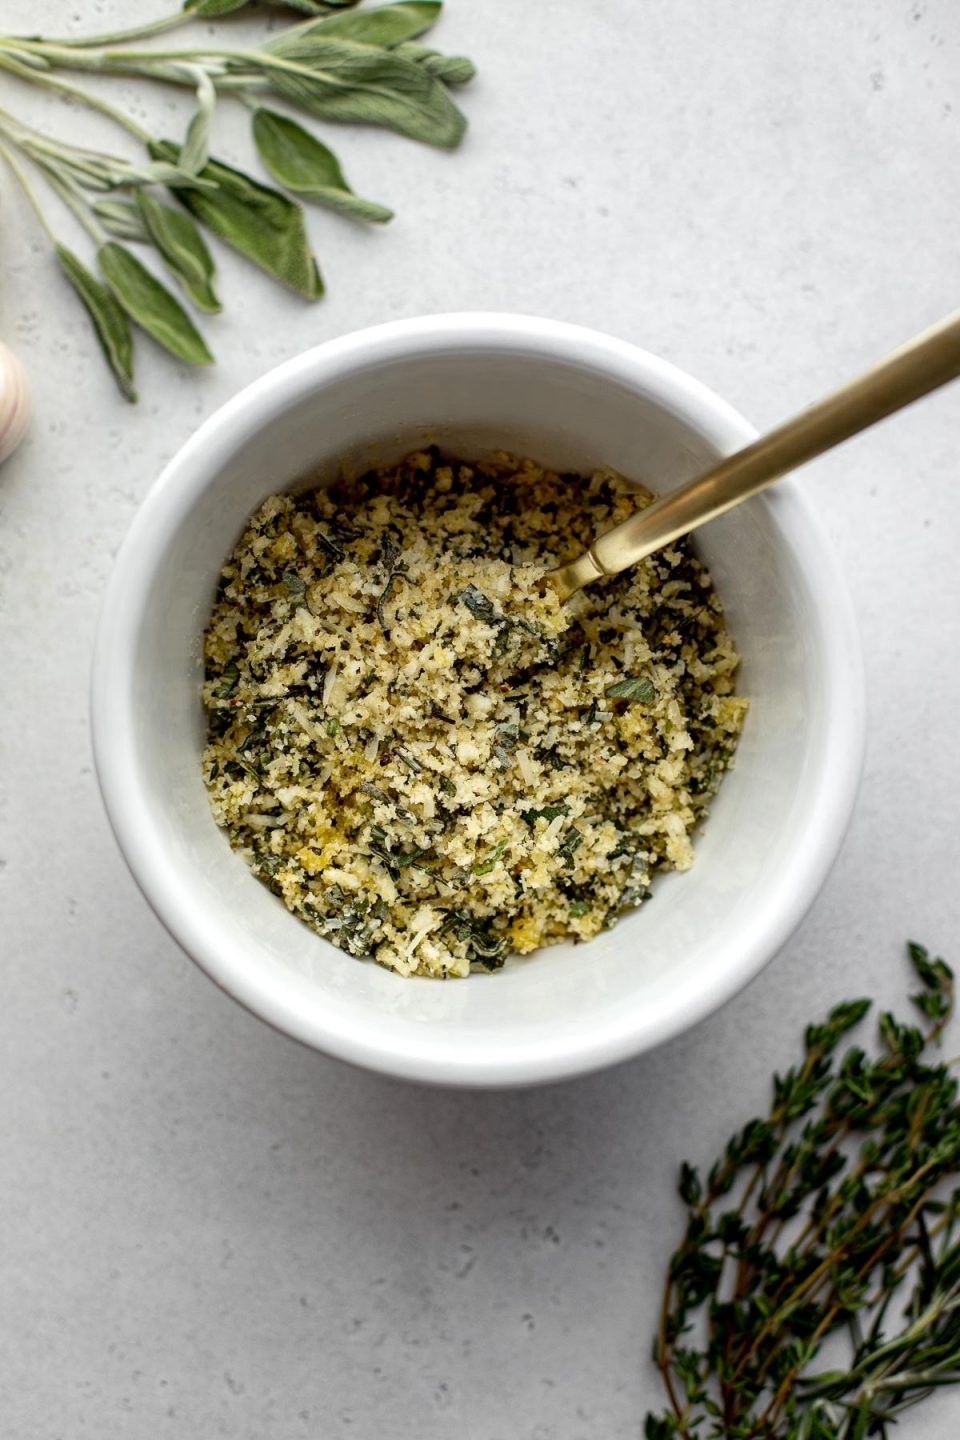 A small white bowl filled with a herbed panko breadcrumb mixture sits atop a creamy white textured surface. A gold spoon rests inside of the bowl and loose sprigs of fresh herbs surround the bowl.